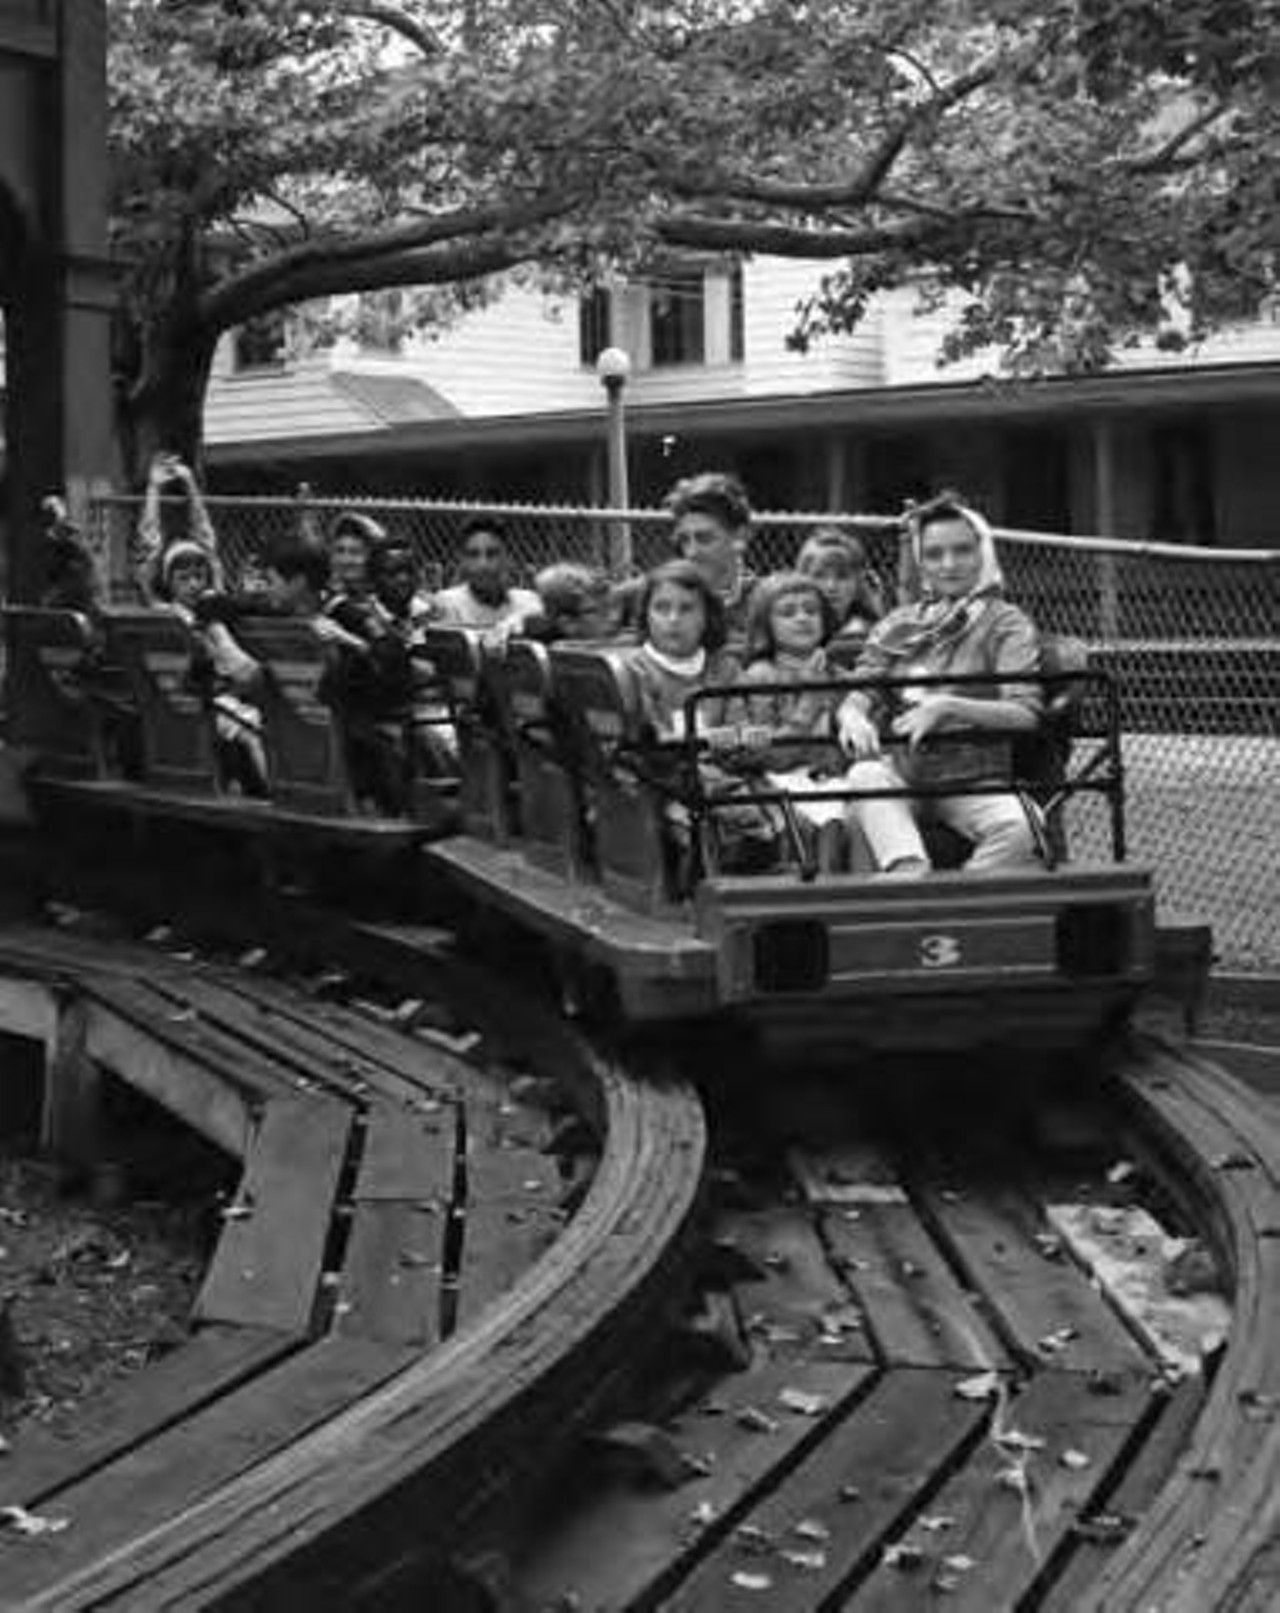 Green Thumb Club members on the kiddie roller coaster at Euclid Beach Park, August, 1964